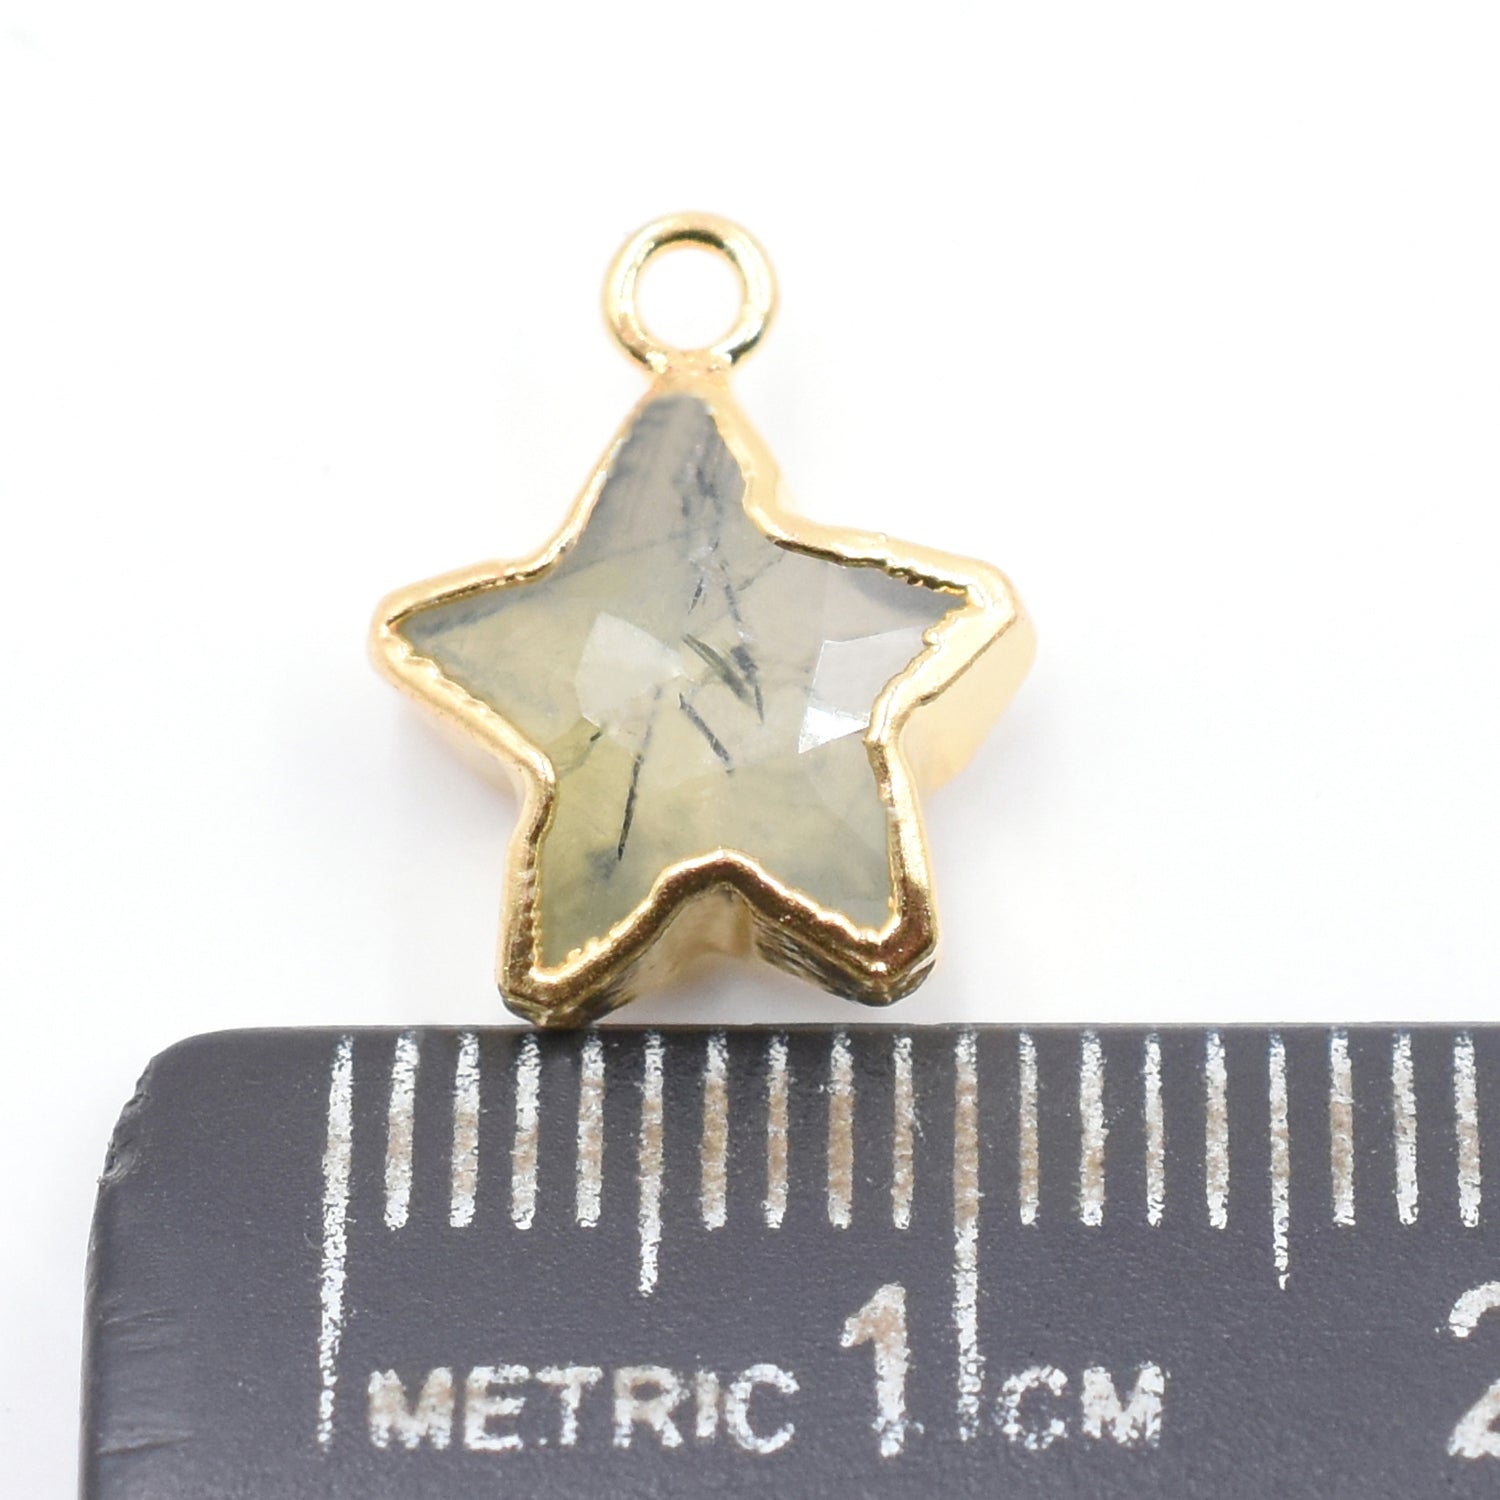 Prehnite 10 To 11 MM Star Shape  Gold Electroplated Pendant (Set Of 2 Pcs)